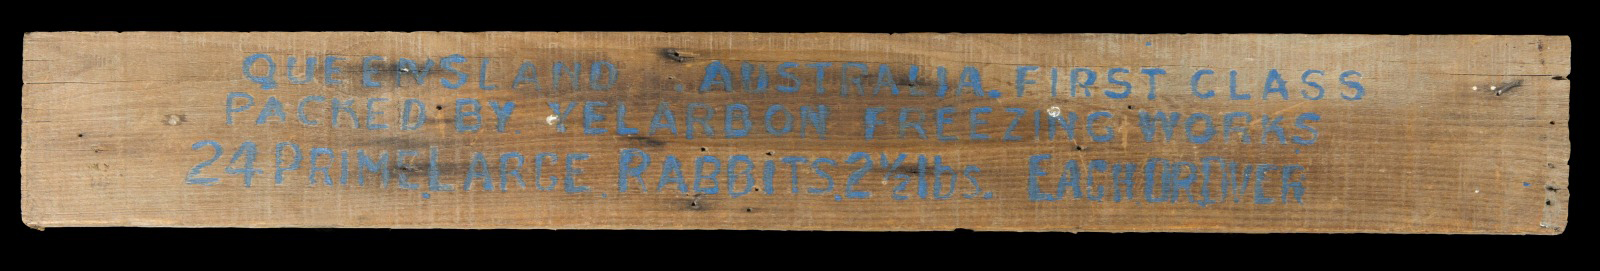 Wooden panel from an export packing case for rabbits. The inscription reads: ‘QUEENSLAND AUSTRALIA FIRST CLASS / PACKED BY YELARBON FREEZING WORKS / 24 PRIME LARGE RABBITS 2 ½ LBS EACH OR OVER’ Bert Wright collection, National Museum of Australia. Photo by George Serras. 